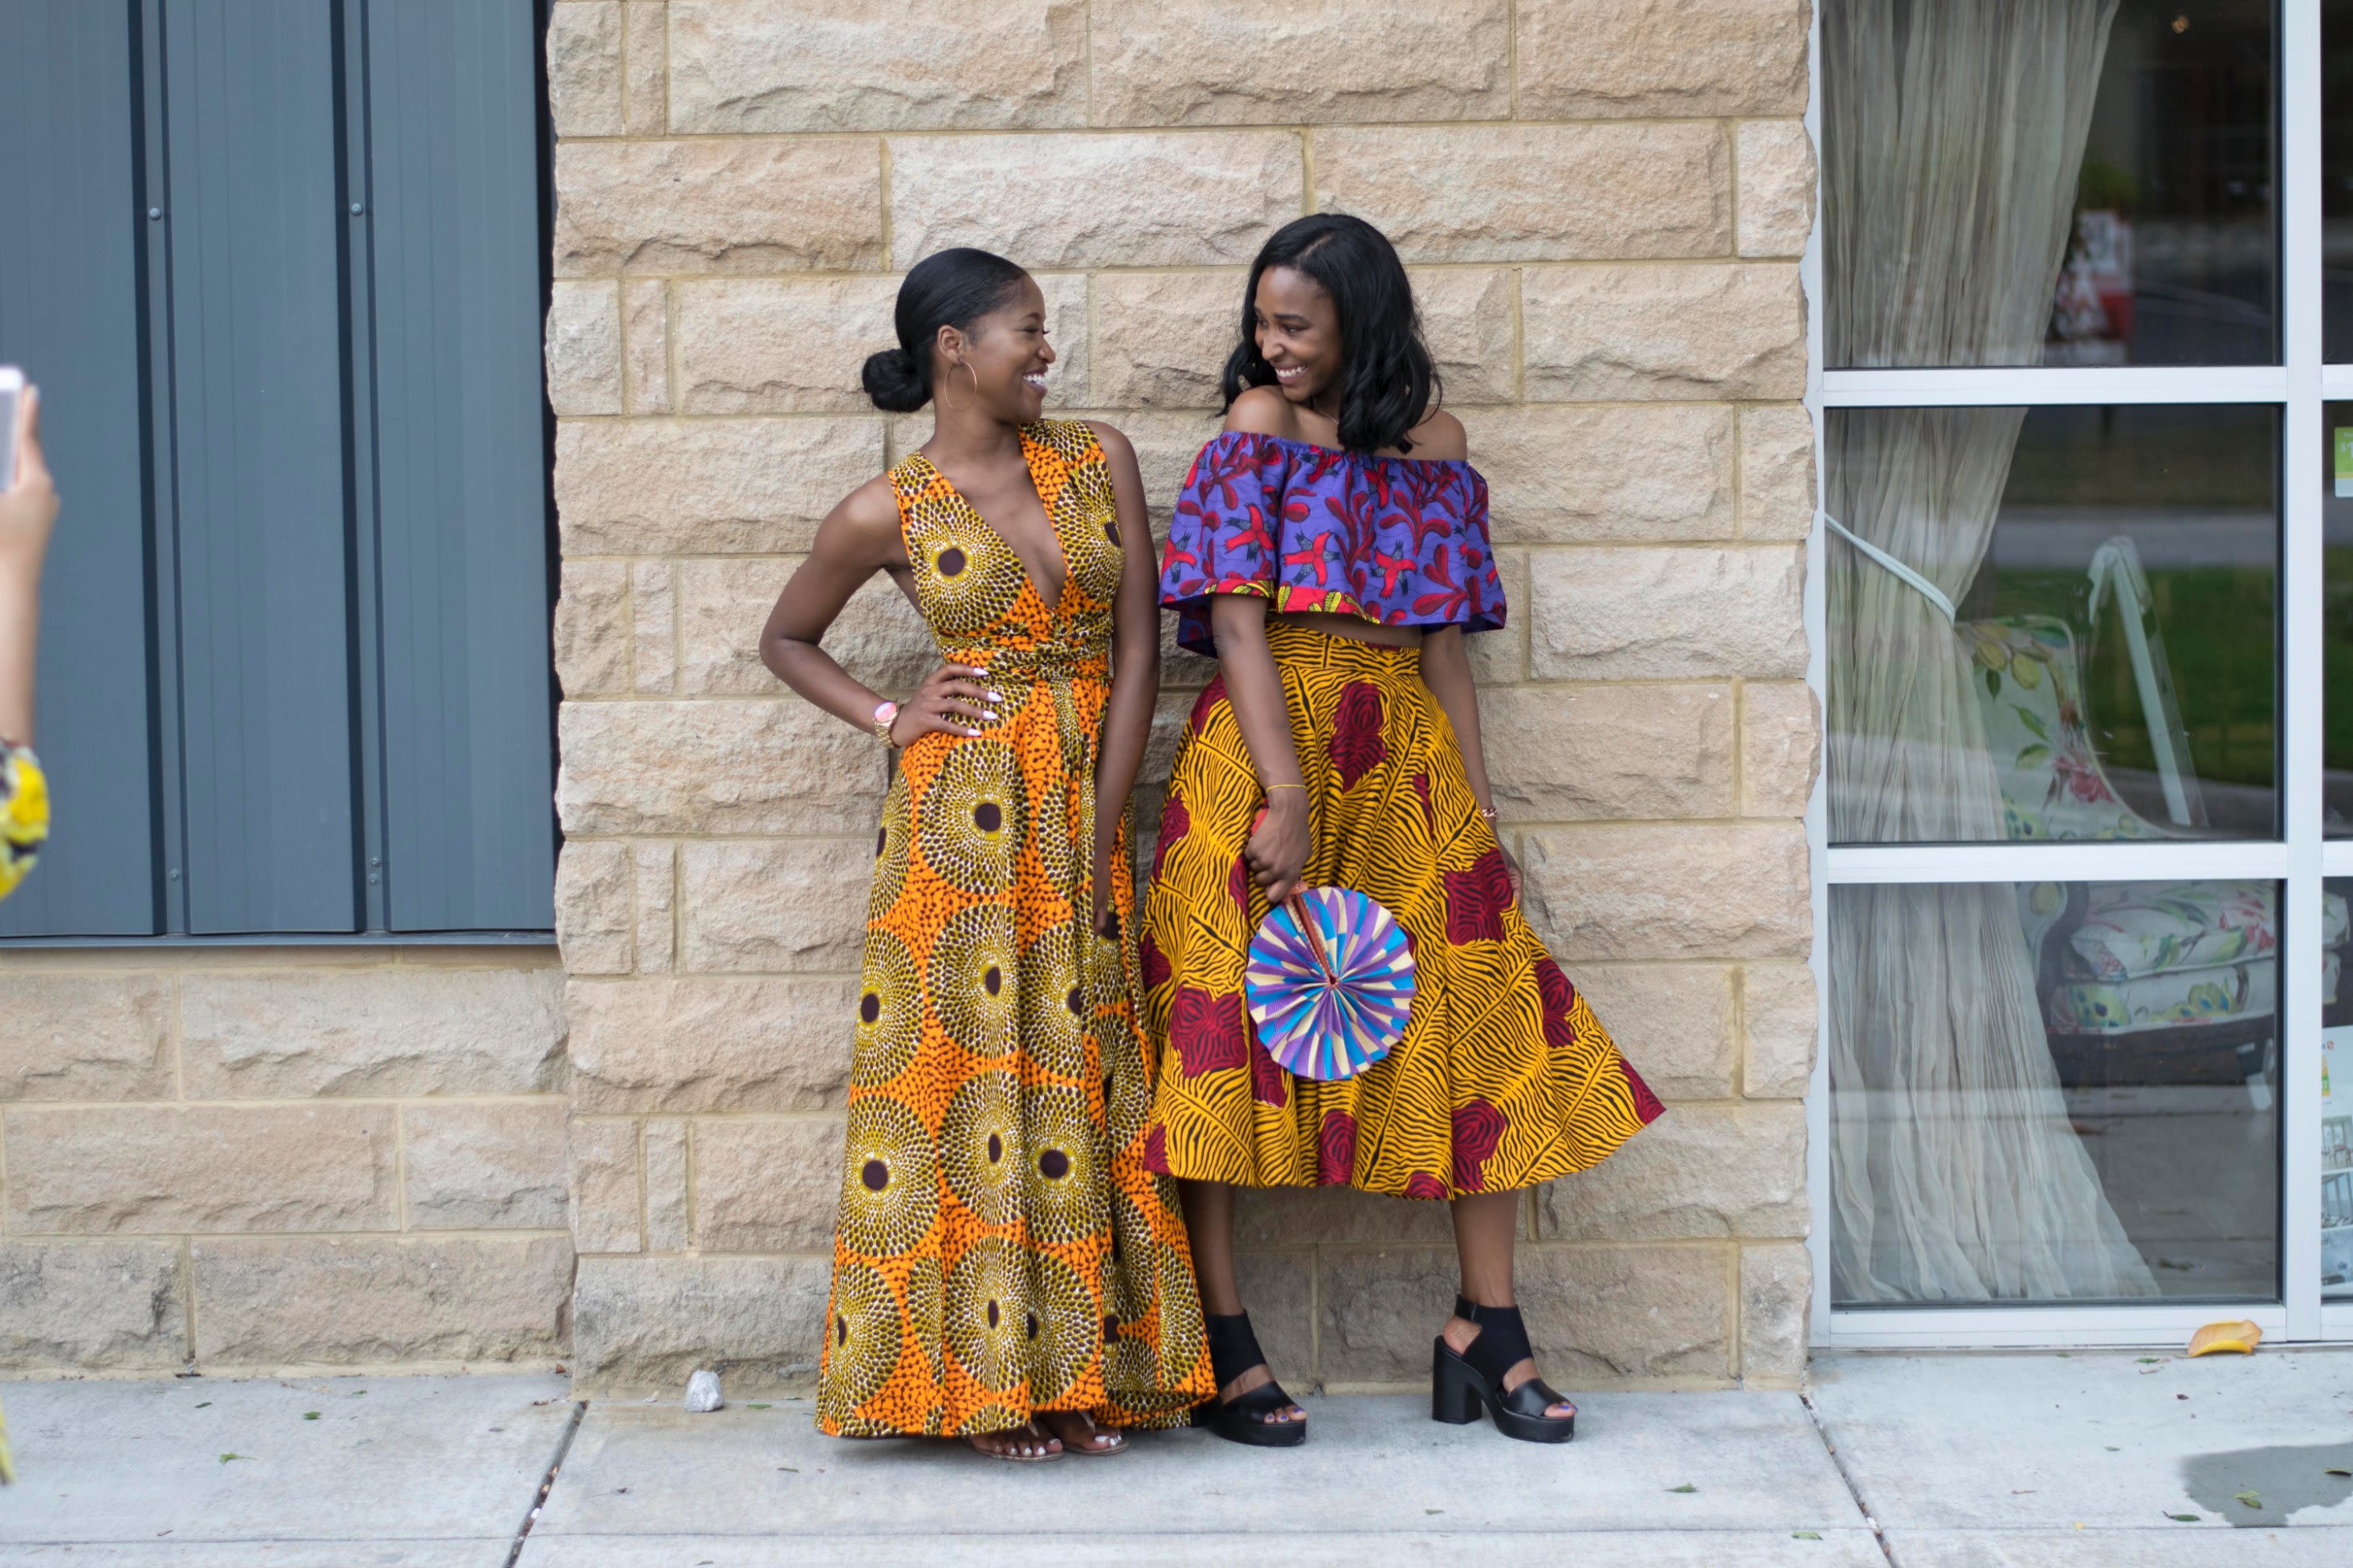 African history told through fashionable printed clothing